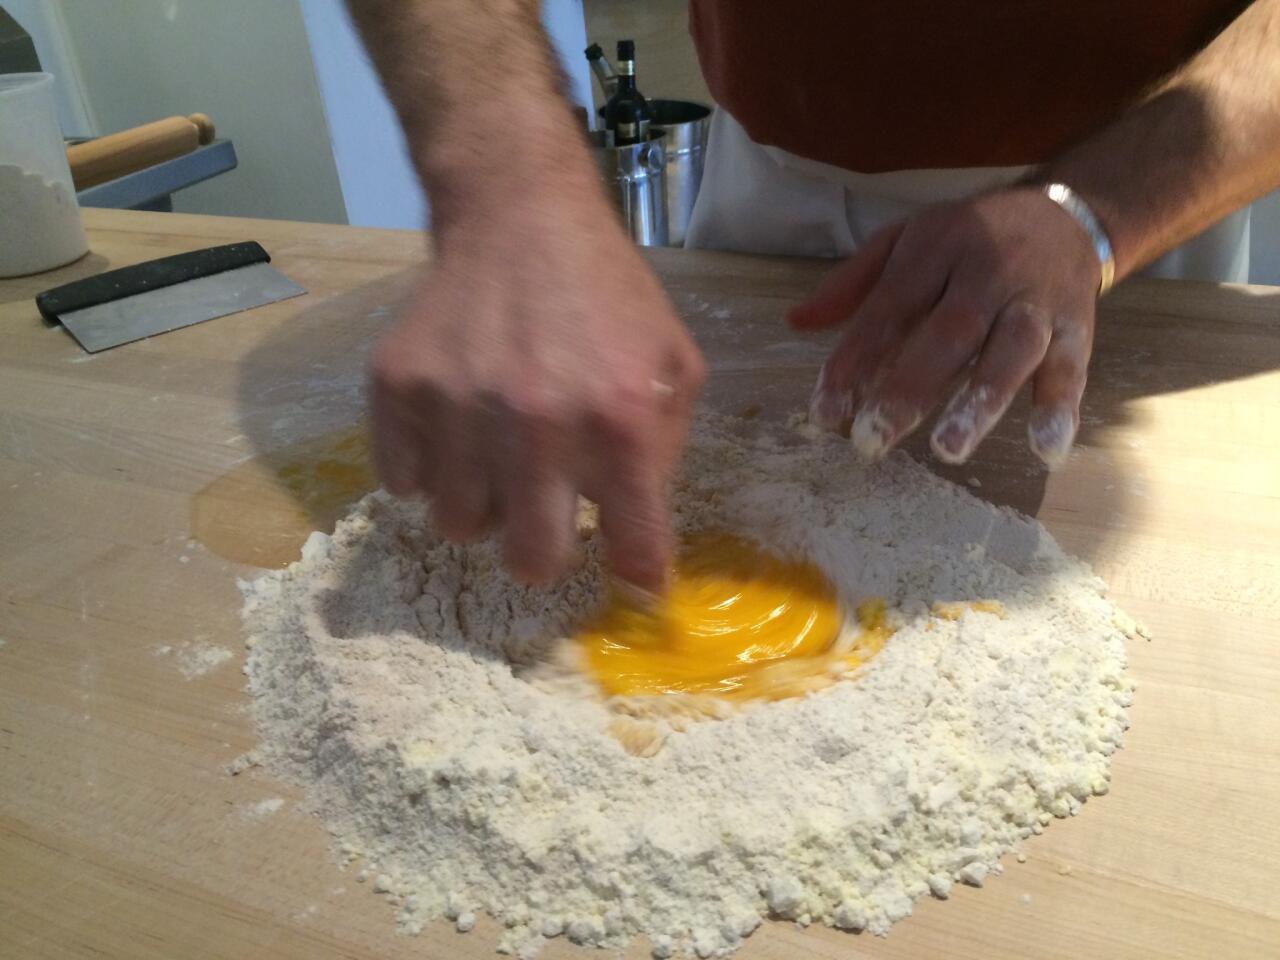 Stirring the eggs into the flour with a finger